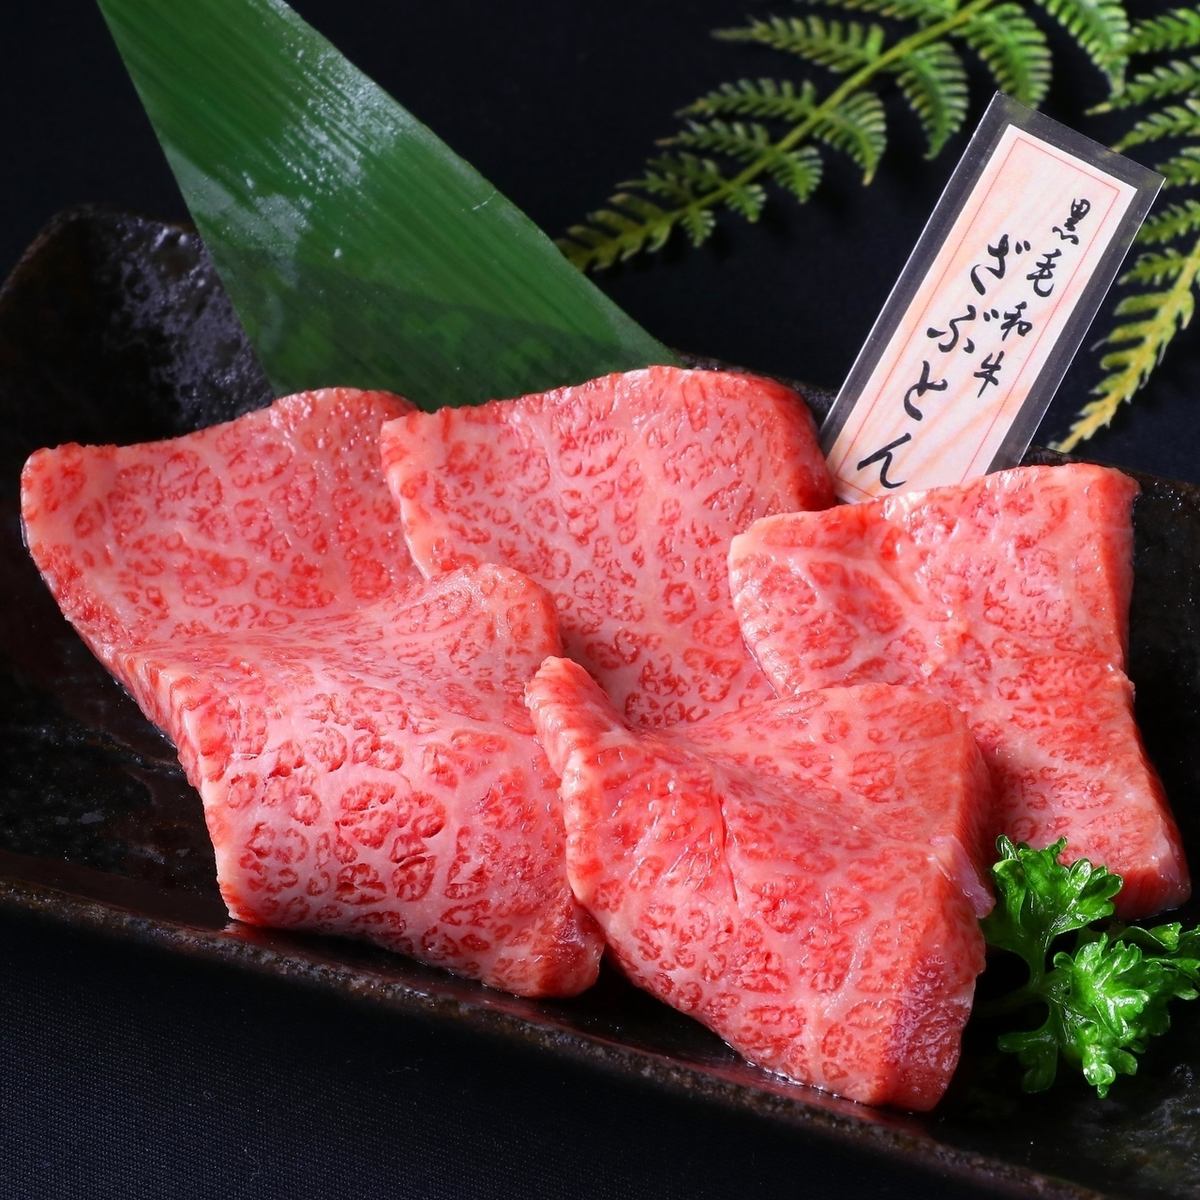 You can enjoy Japanese black beef at a reasonable price, such as special subtons and hormones.